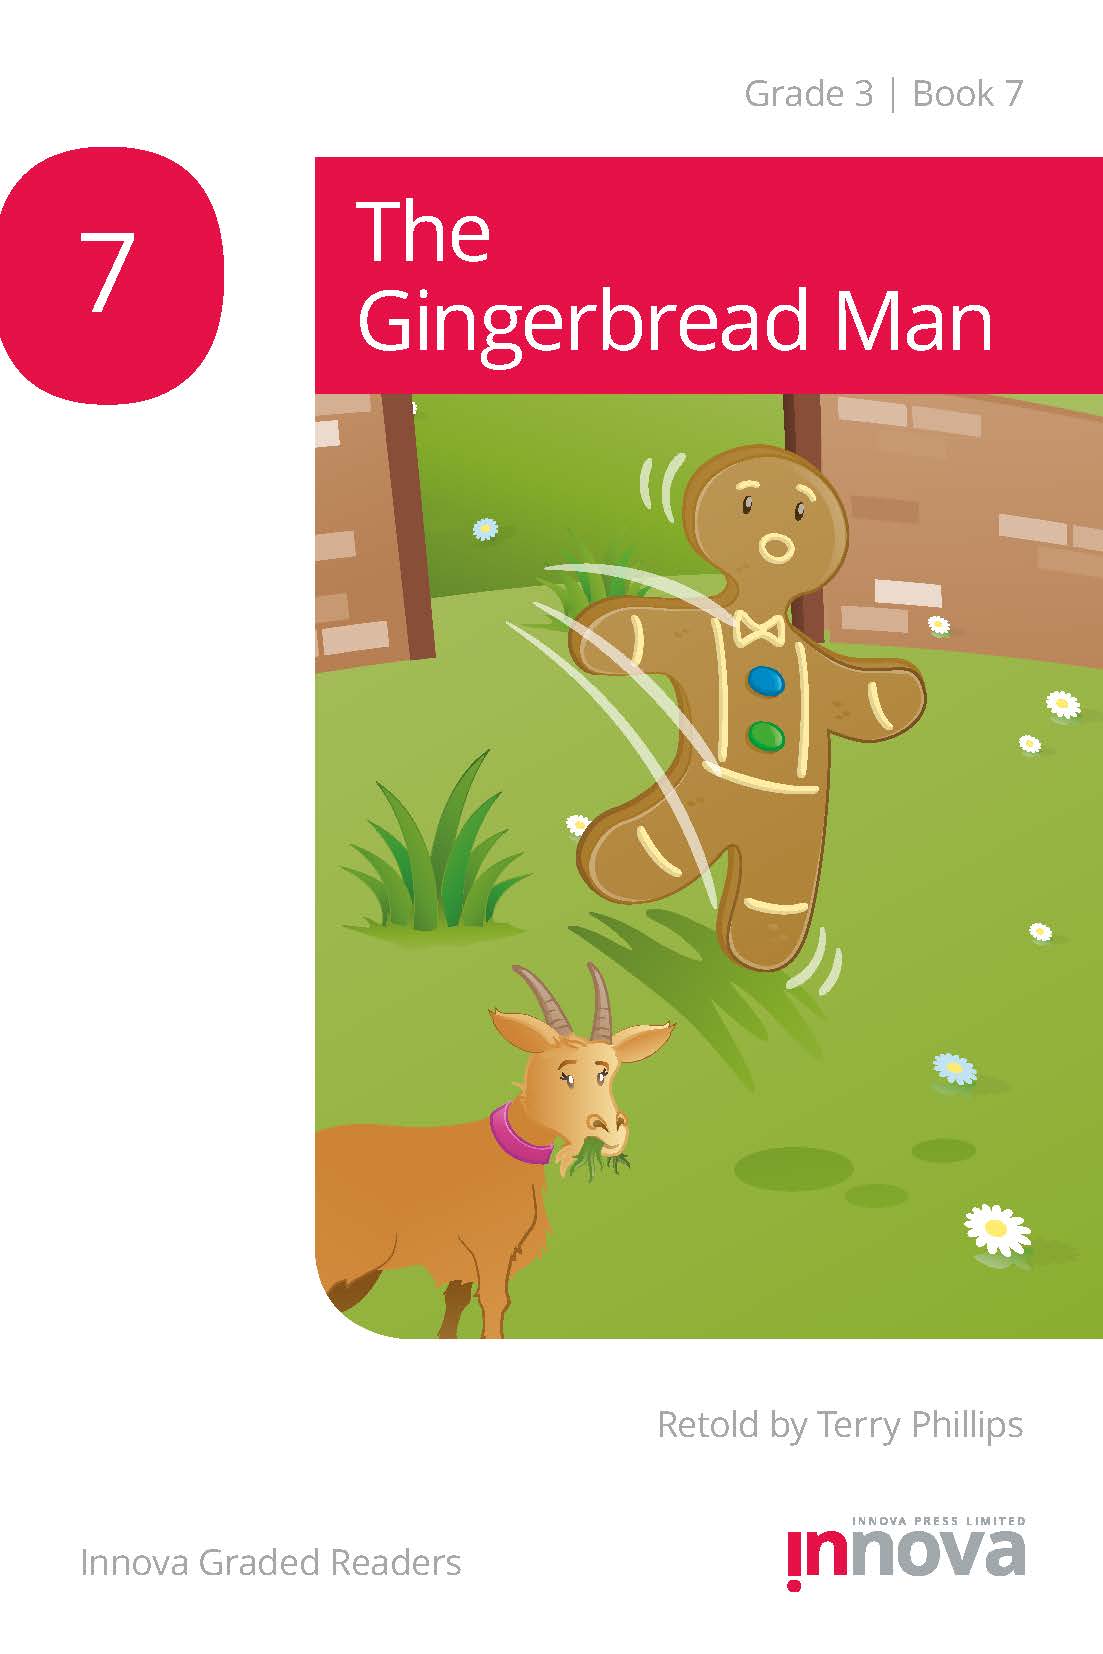 Innova Press The Gingerbread Man cover, gingerbread man runs out of doorway and past a goat